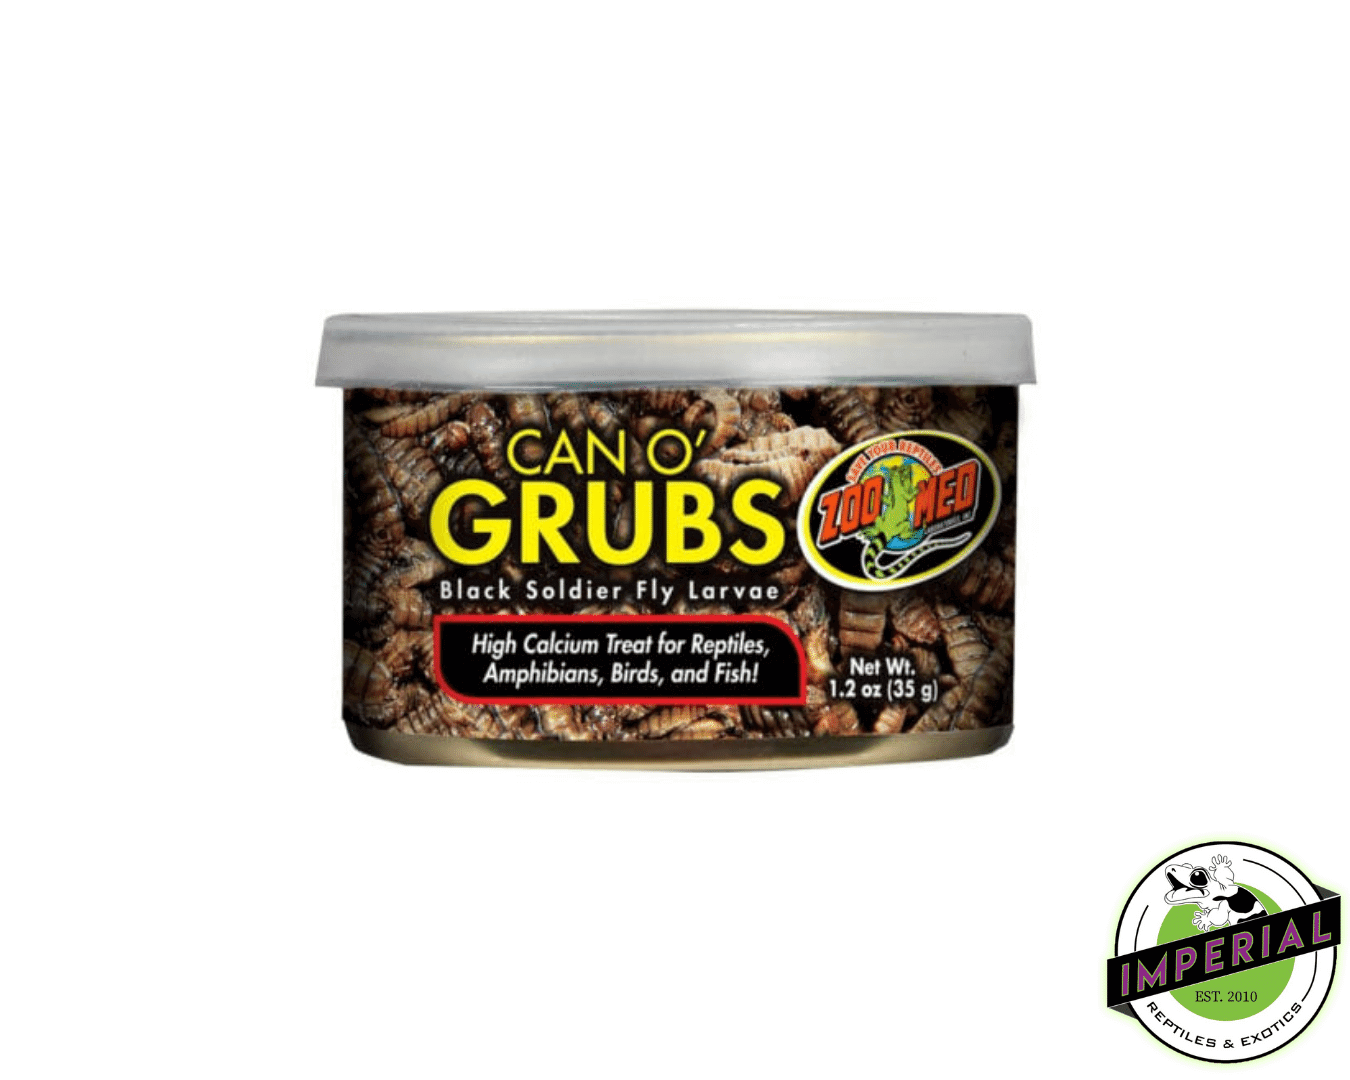 Buy canned grubs for sale online at cheap prices.